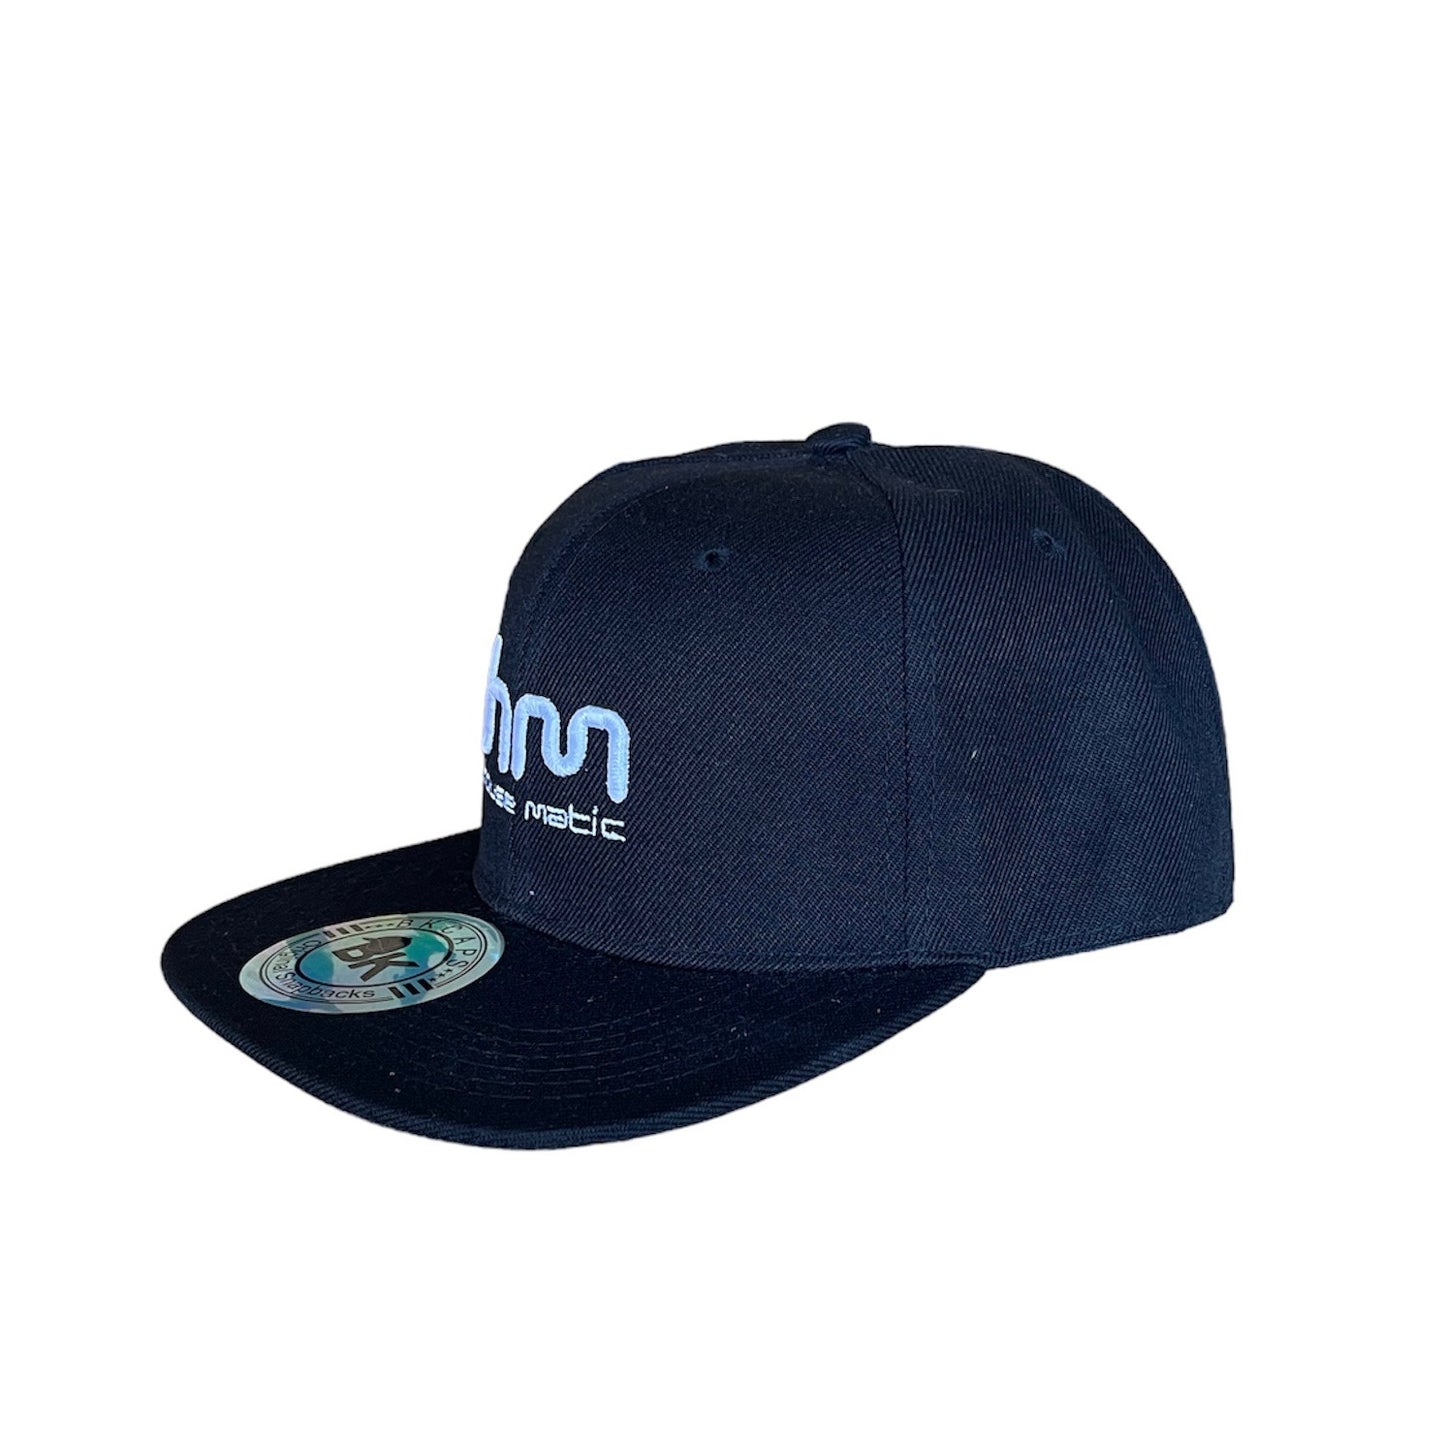 Housematic Ftted Snapback